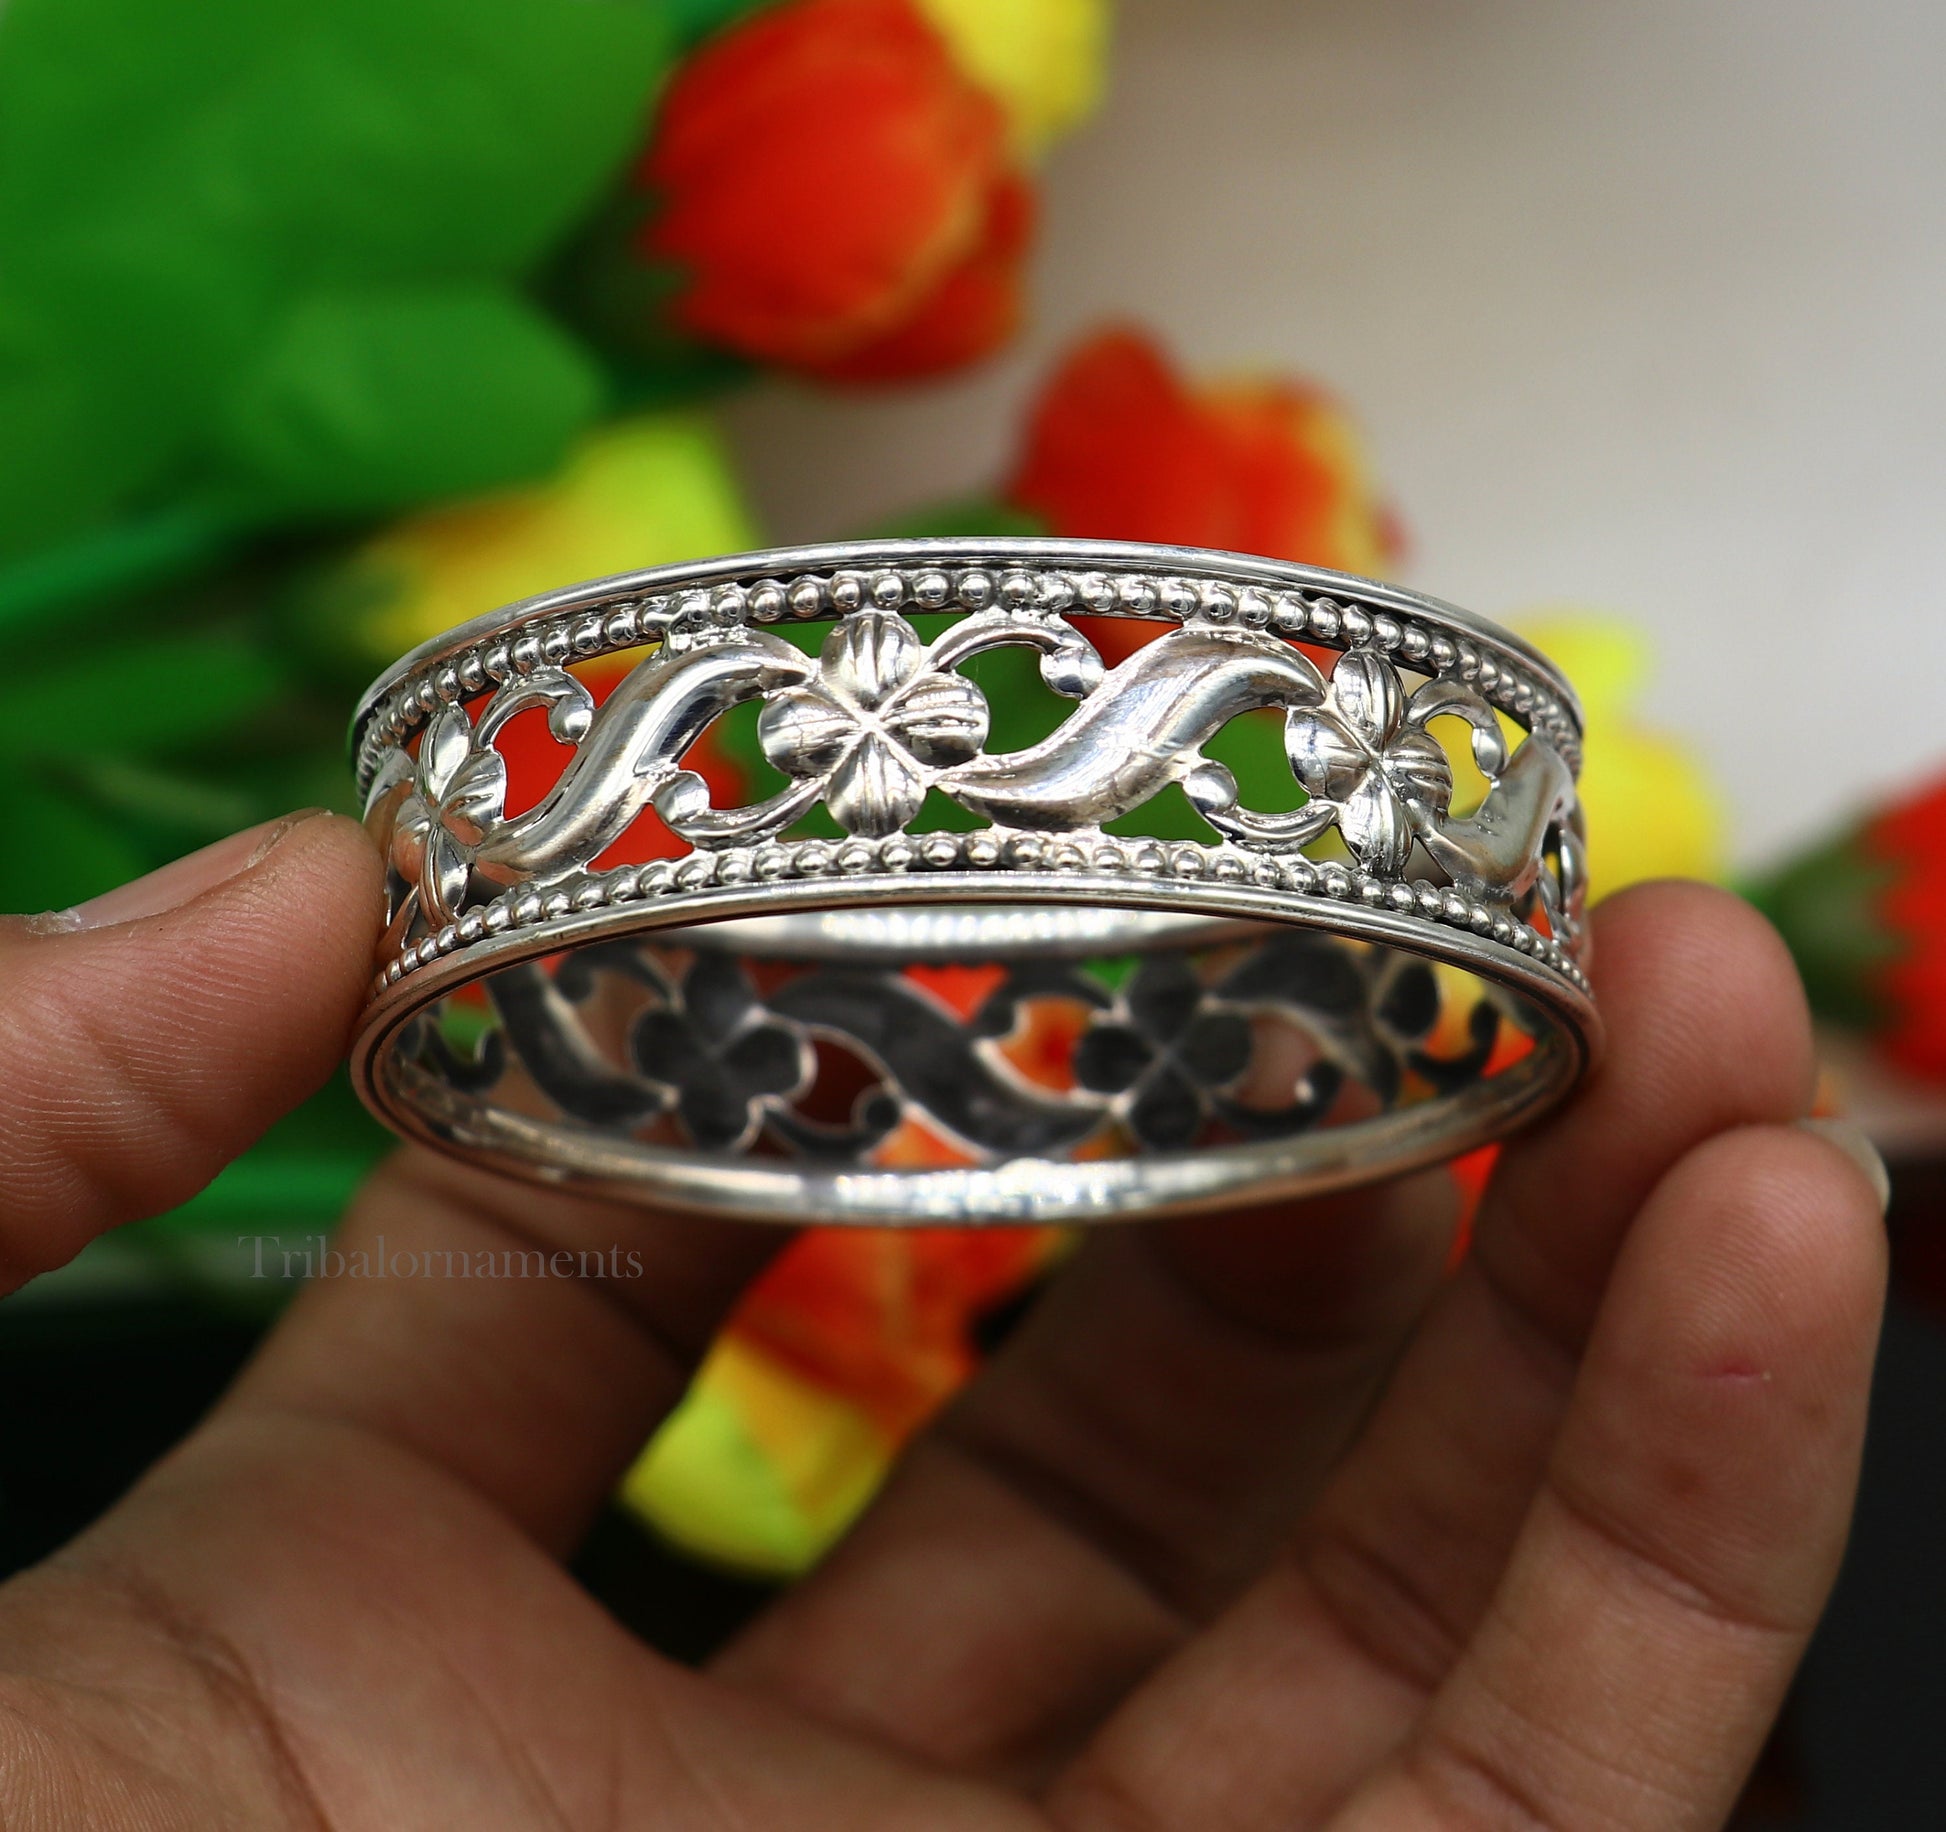 925 sterling silver floral design unique style handmade bangle bracelet , best brides collection wedding jewelry from india ba124 - TRIBAL ORNAMENTS